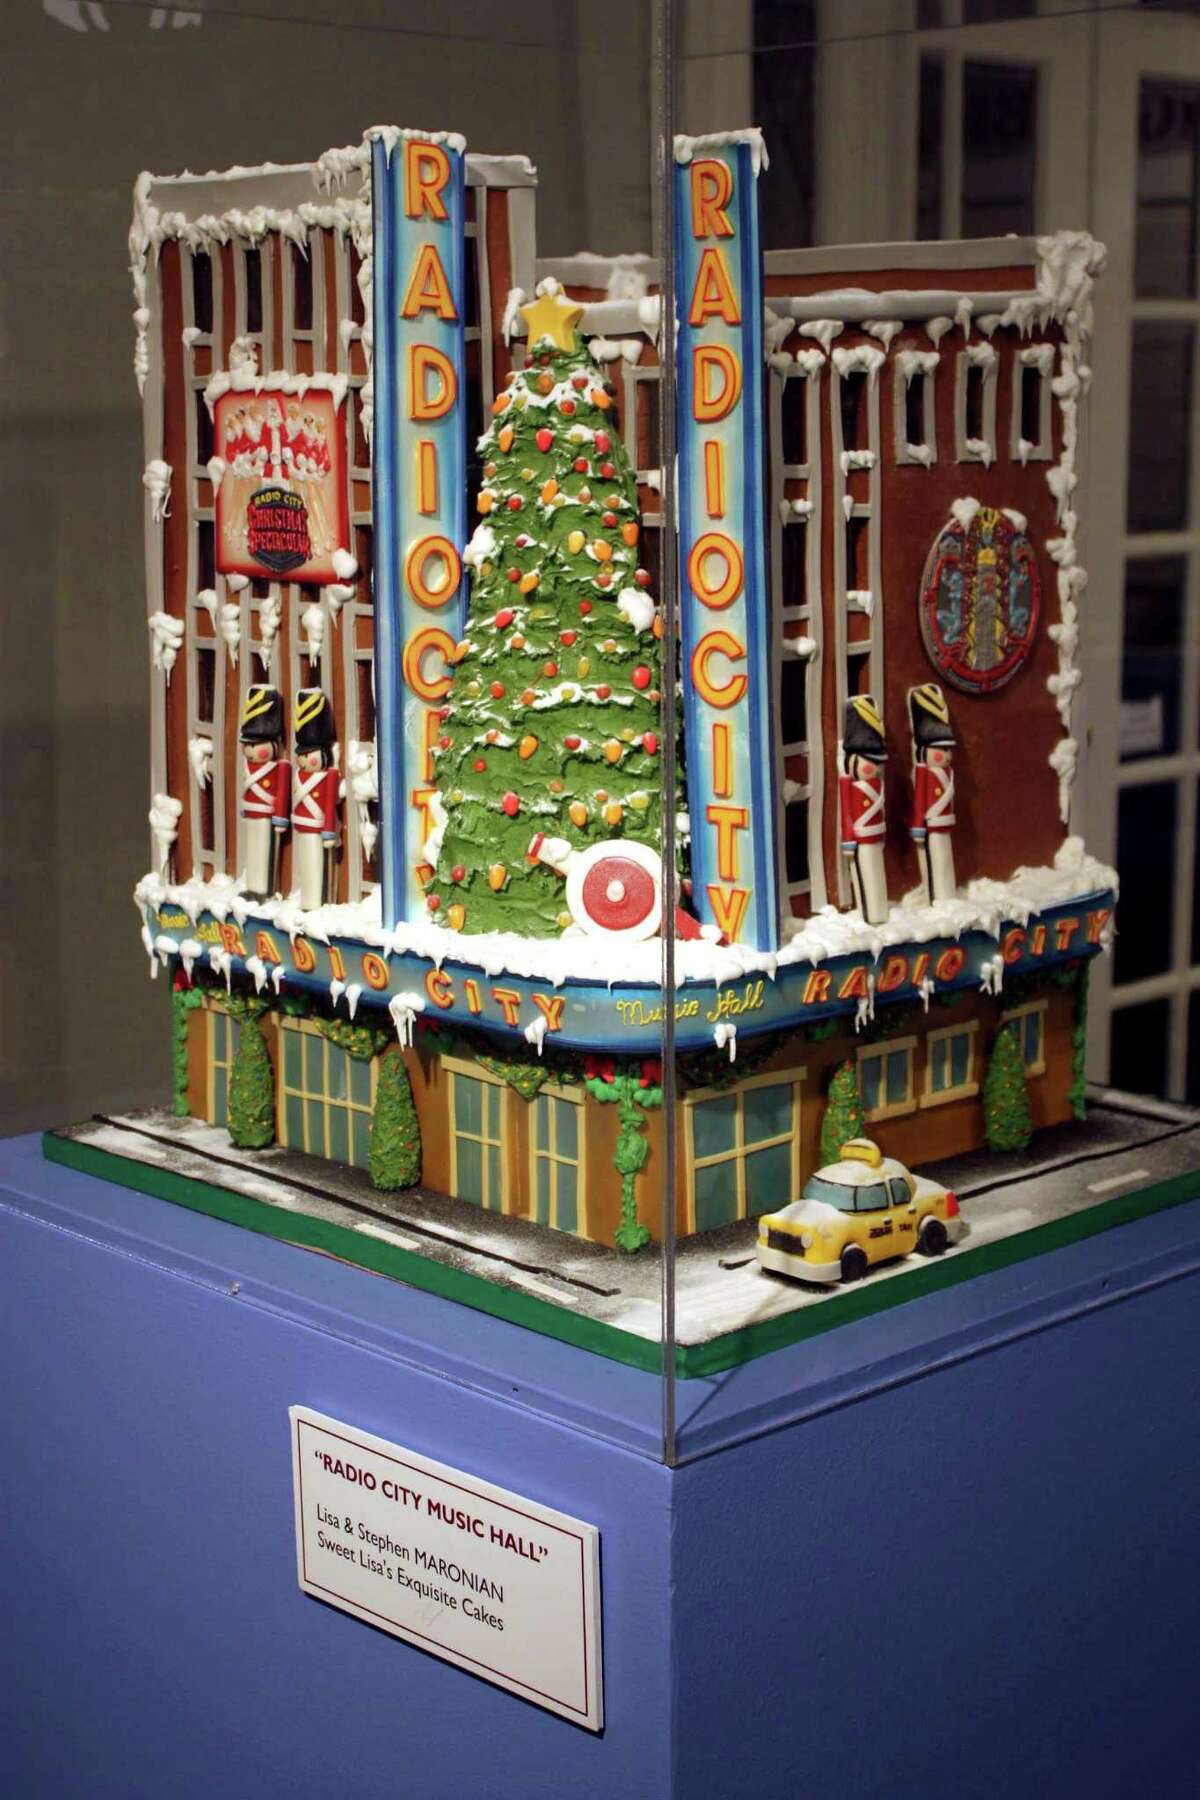 Baker Lisa Maronian, of Sweet Lisa’s in Greenwich, has developed a reputation for being up to any 3-D challenge, including this cake above in the shape of Radio City Music Hall. Left, a garden grows on a Sweet Lisa’s wedding cake.